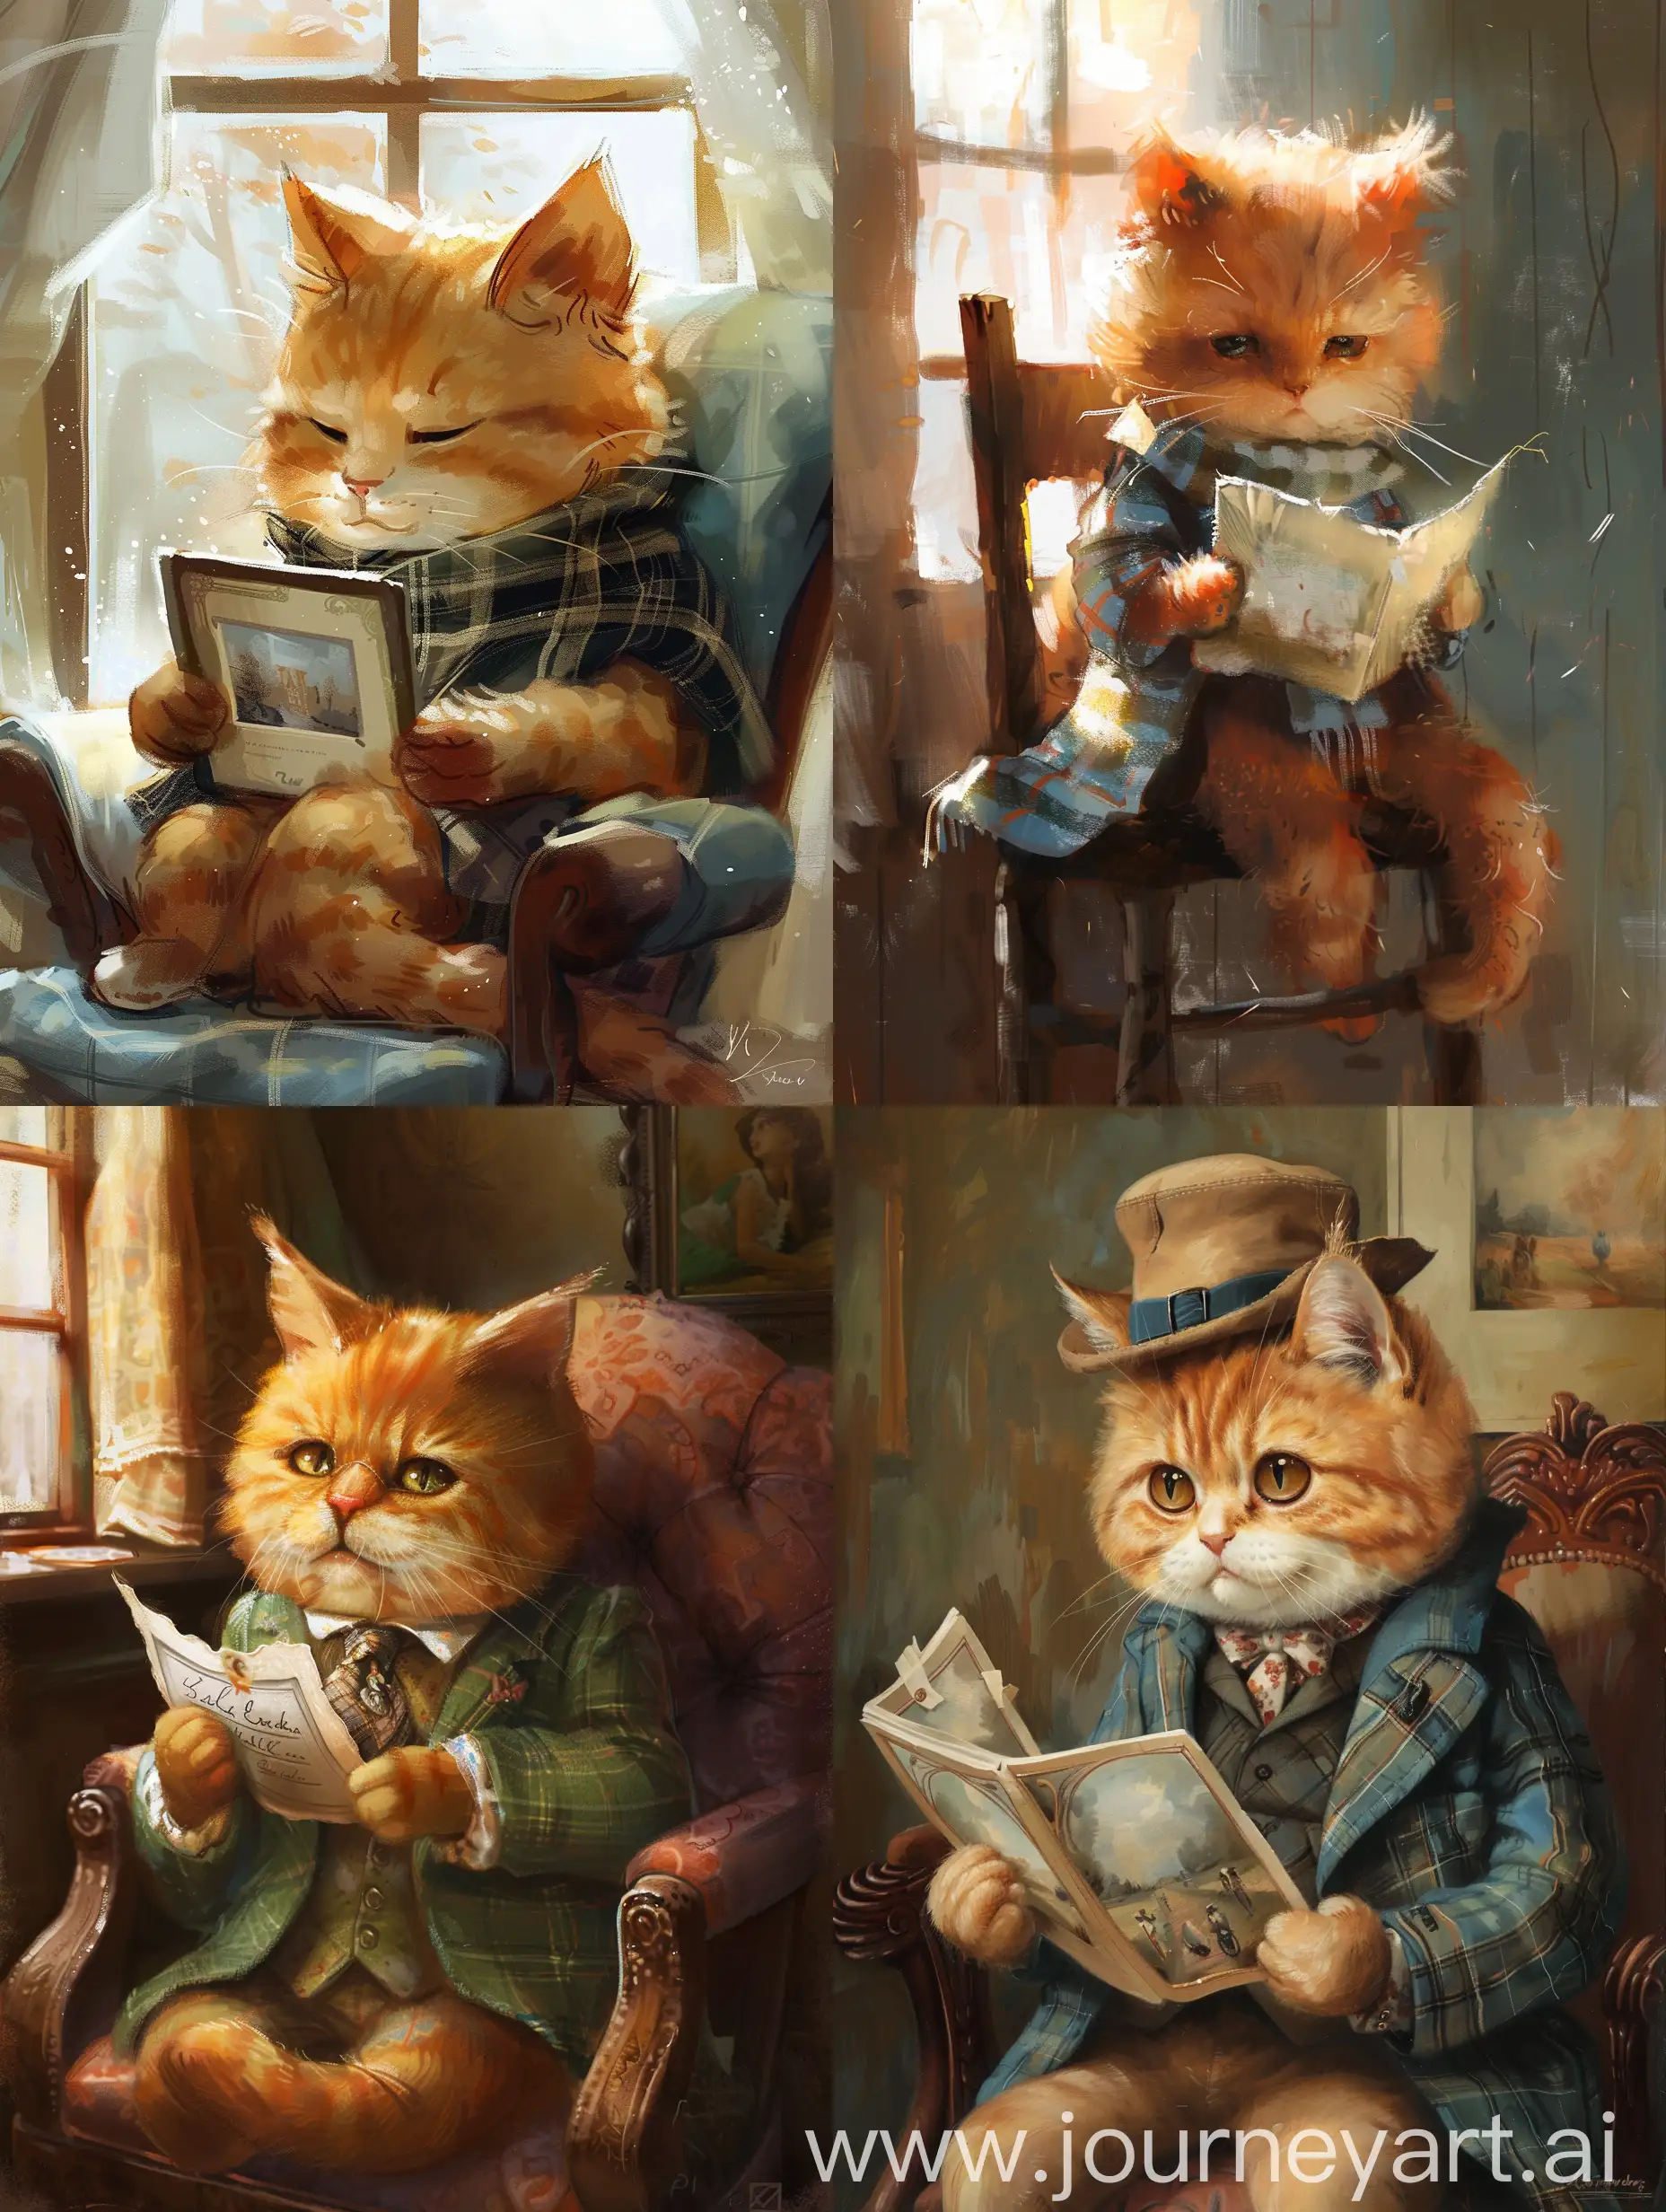 A chubby baby orange cat, dressed in a fashionable outfit, looks sadly at a picture he is holding. Sitting on a chair. Anthropomorphic, chibi. indoor setting.Shooting it from the left side.